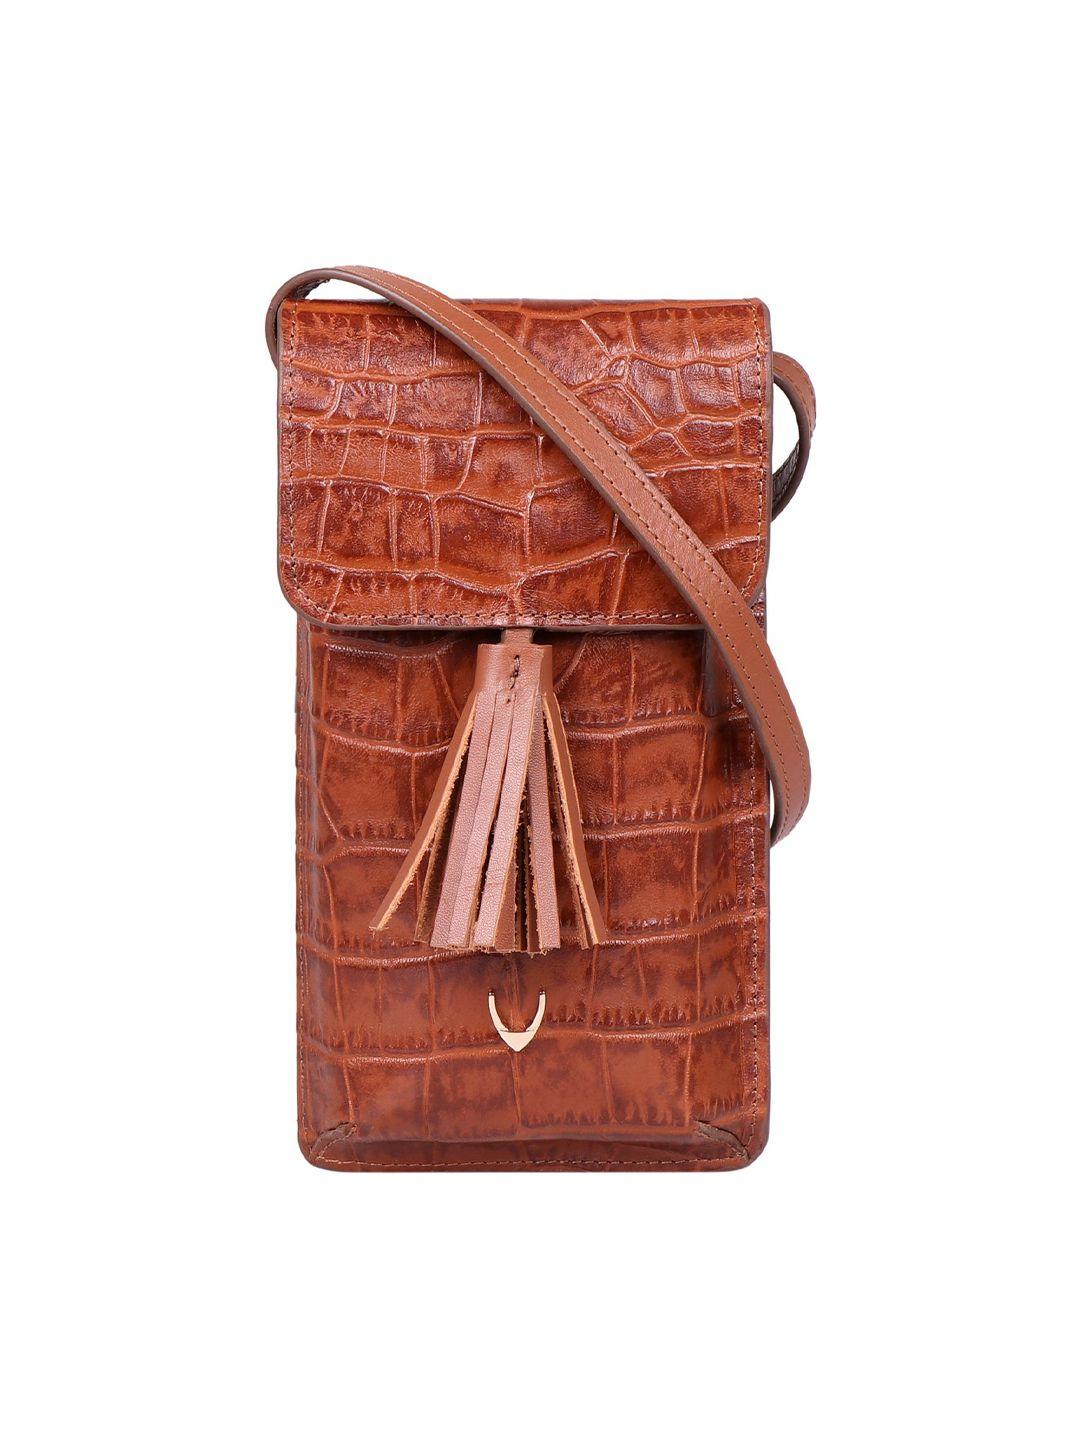 hidesign women tan animal textured leather envelope with sling strap